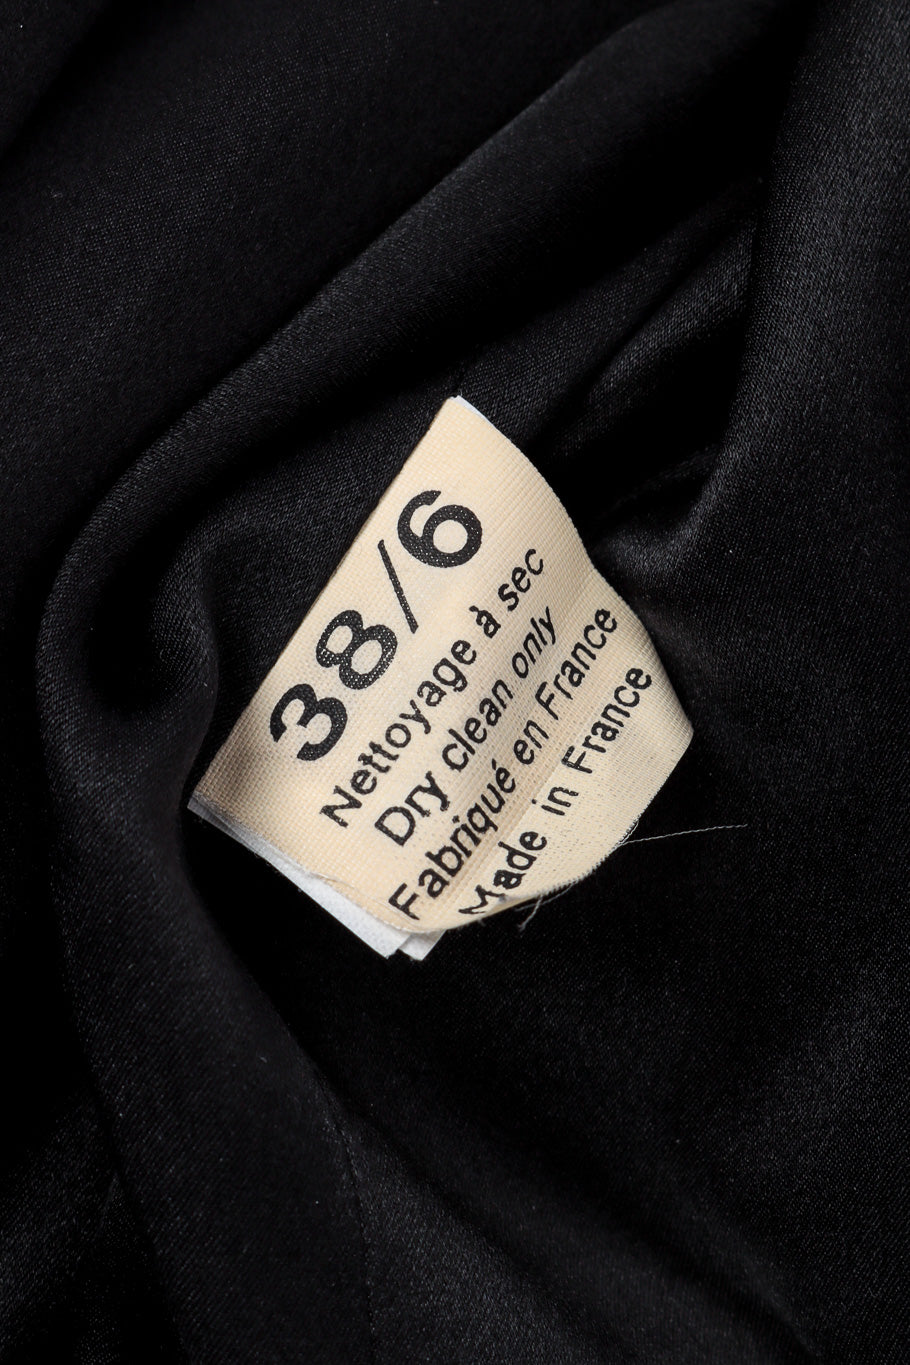 1995 F/W Dolores Tailored Jacket by John Galliano fabric and size tag @recessla